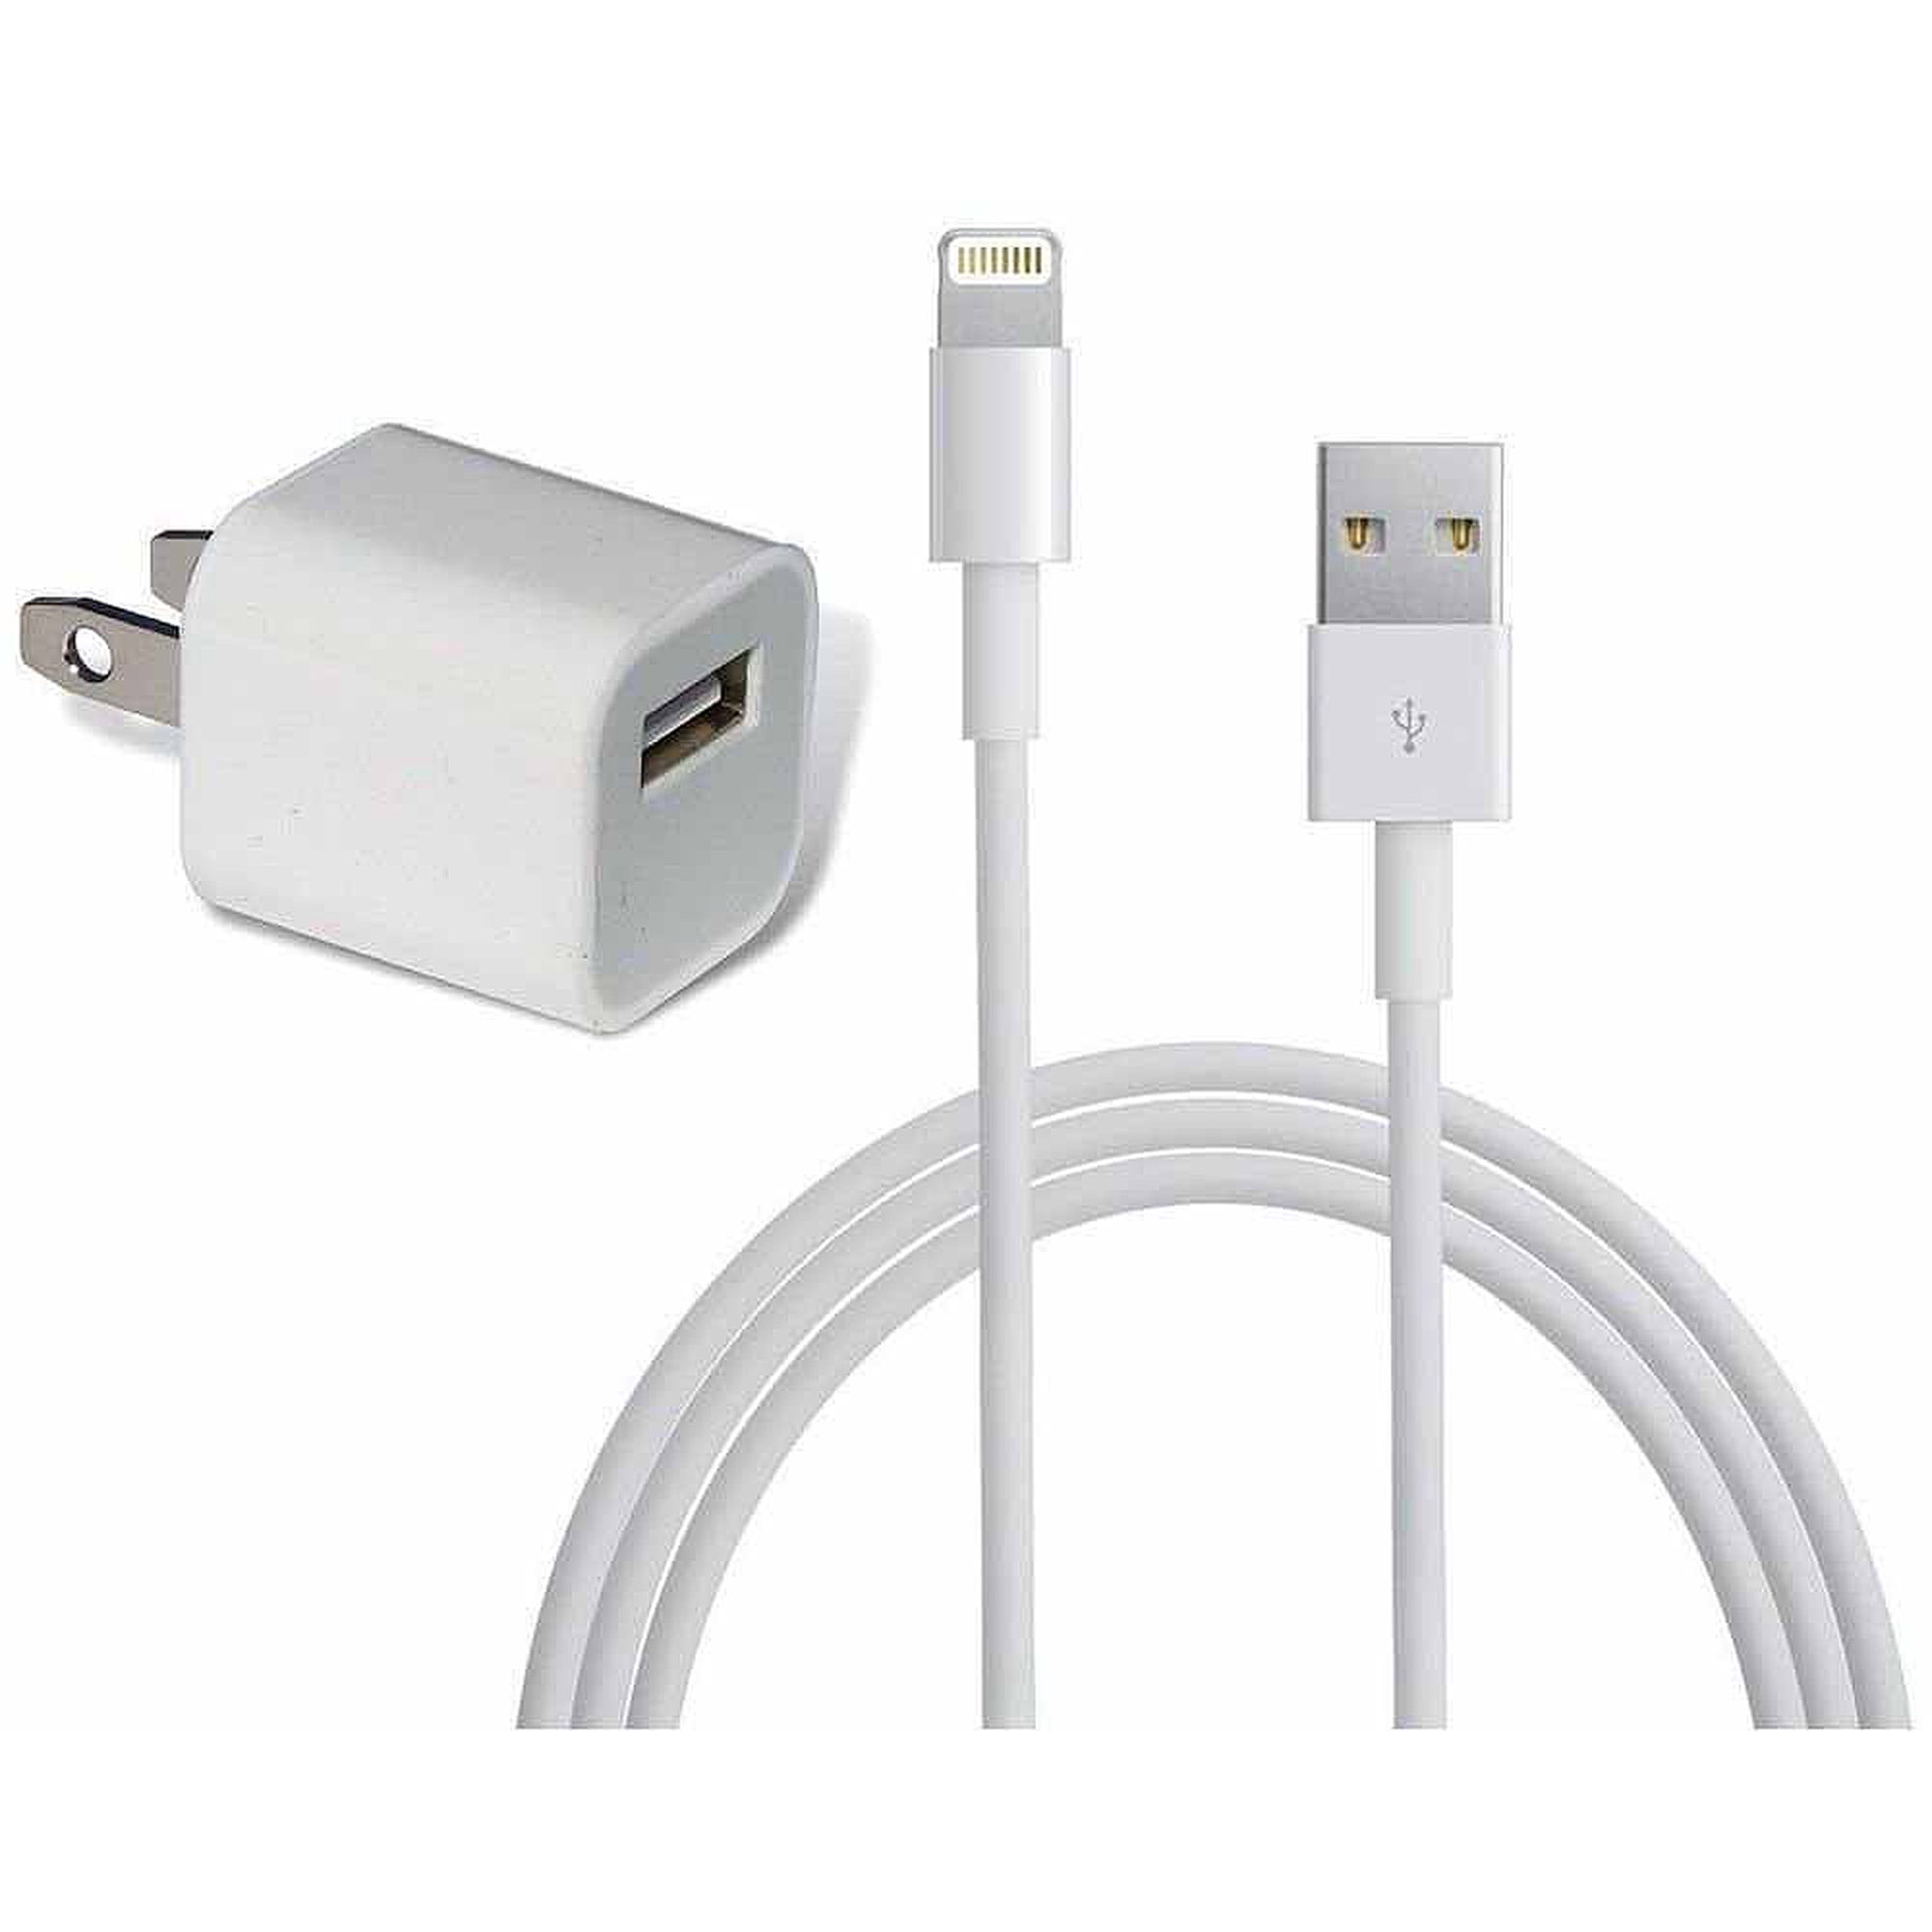 Iphone Charger - Homecare24